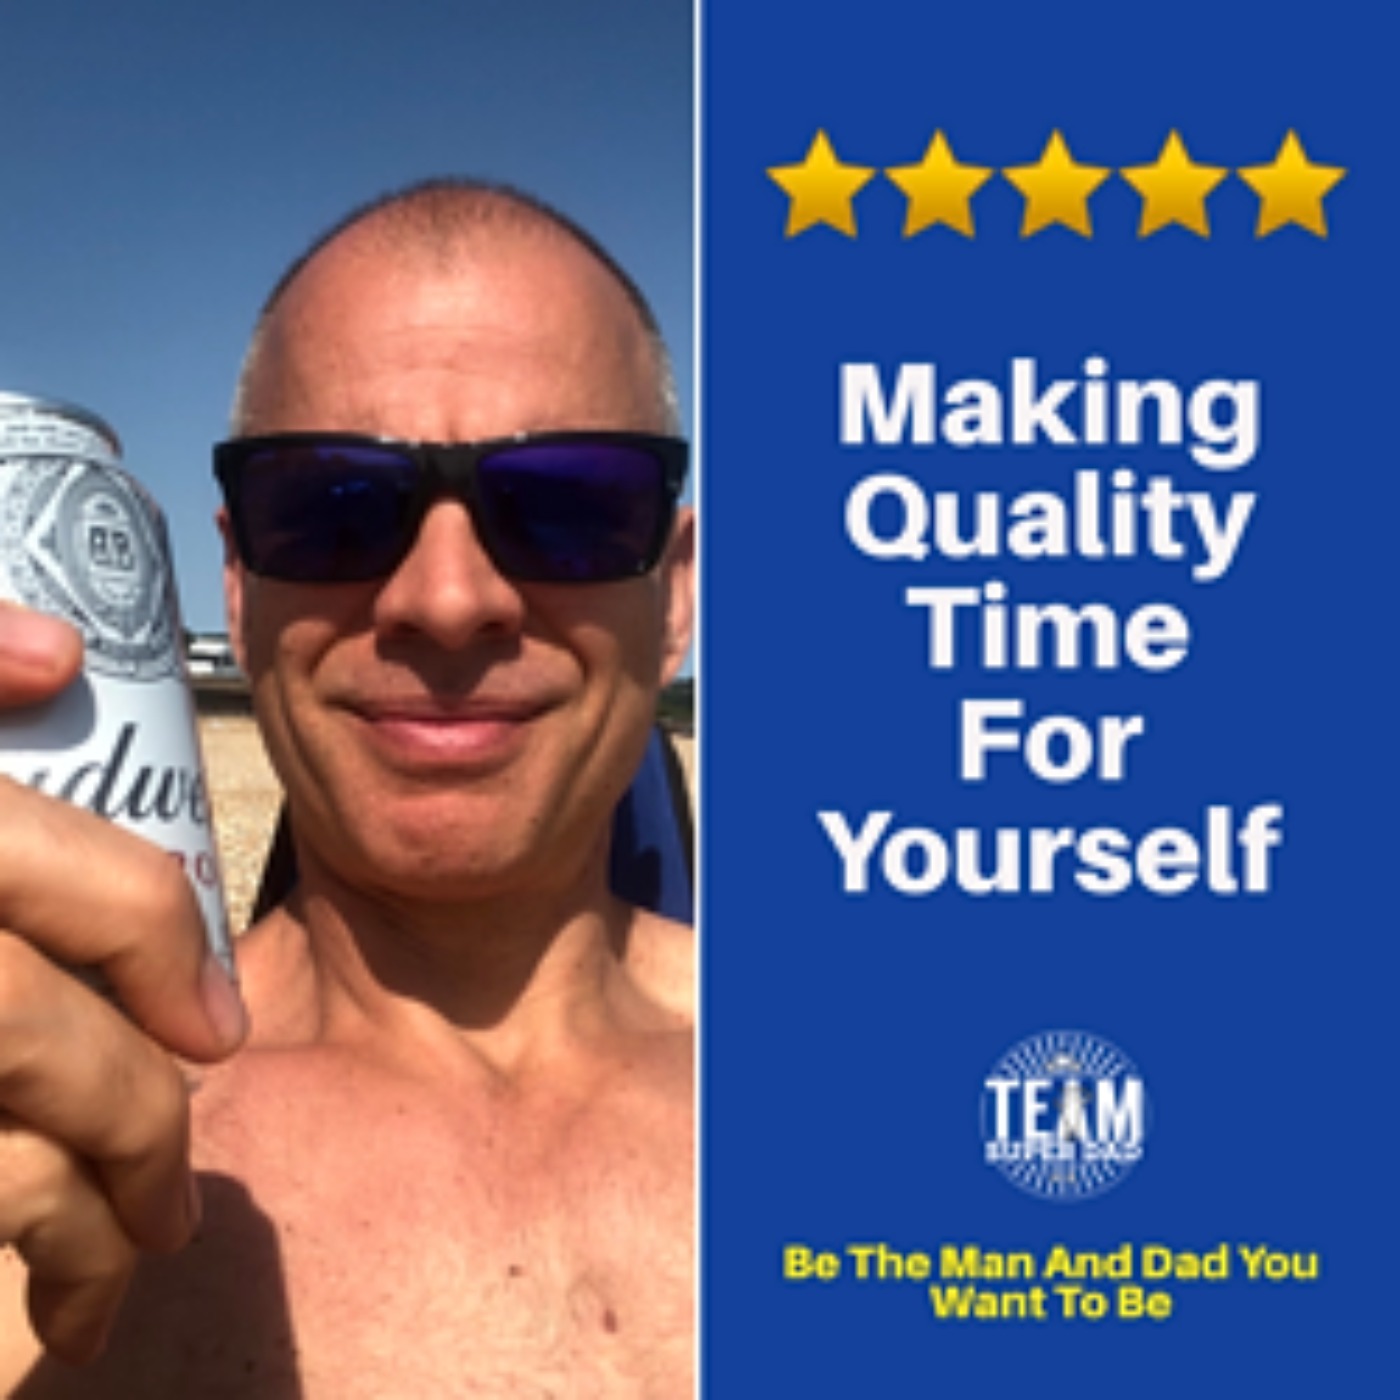 Making Quality Time For Yourself Is Vital For Feeling Fulfilled